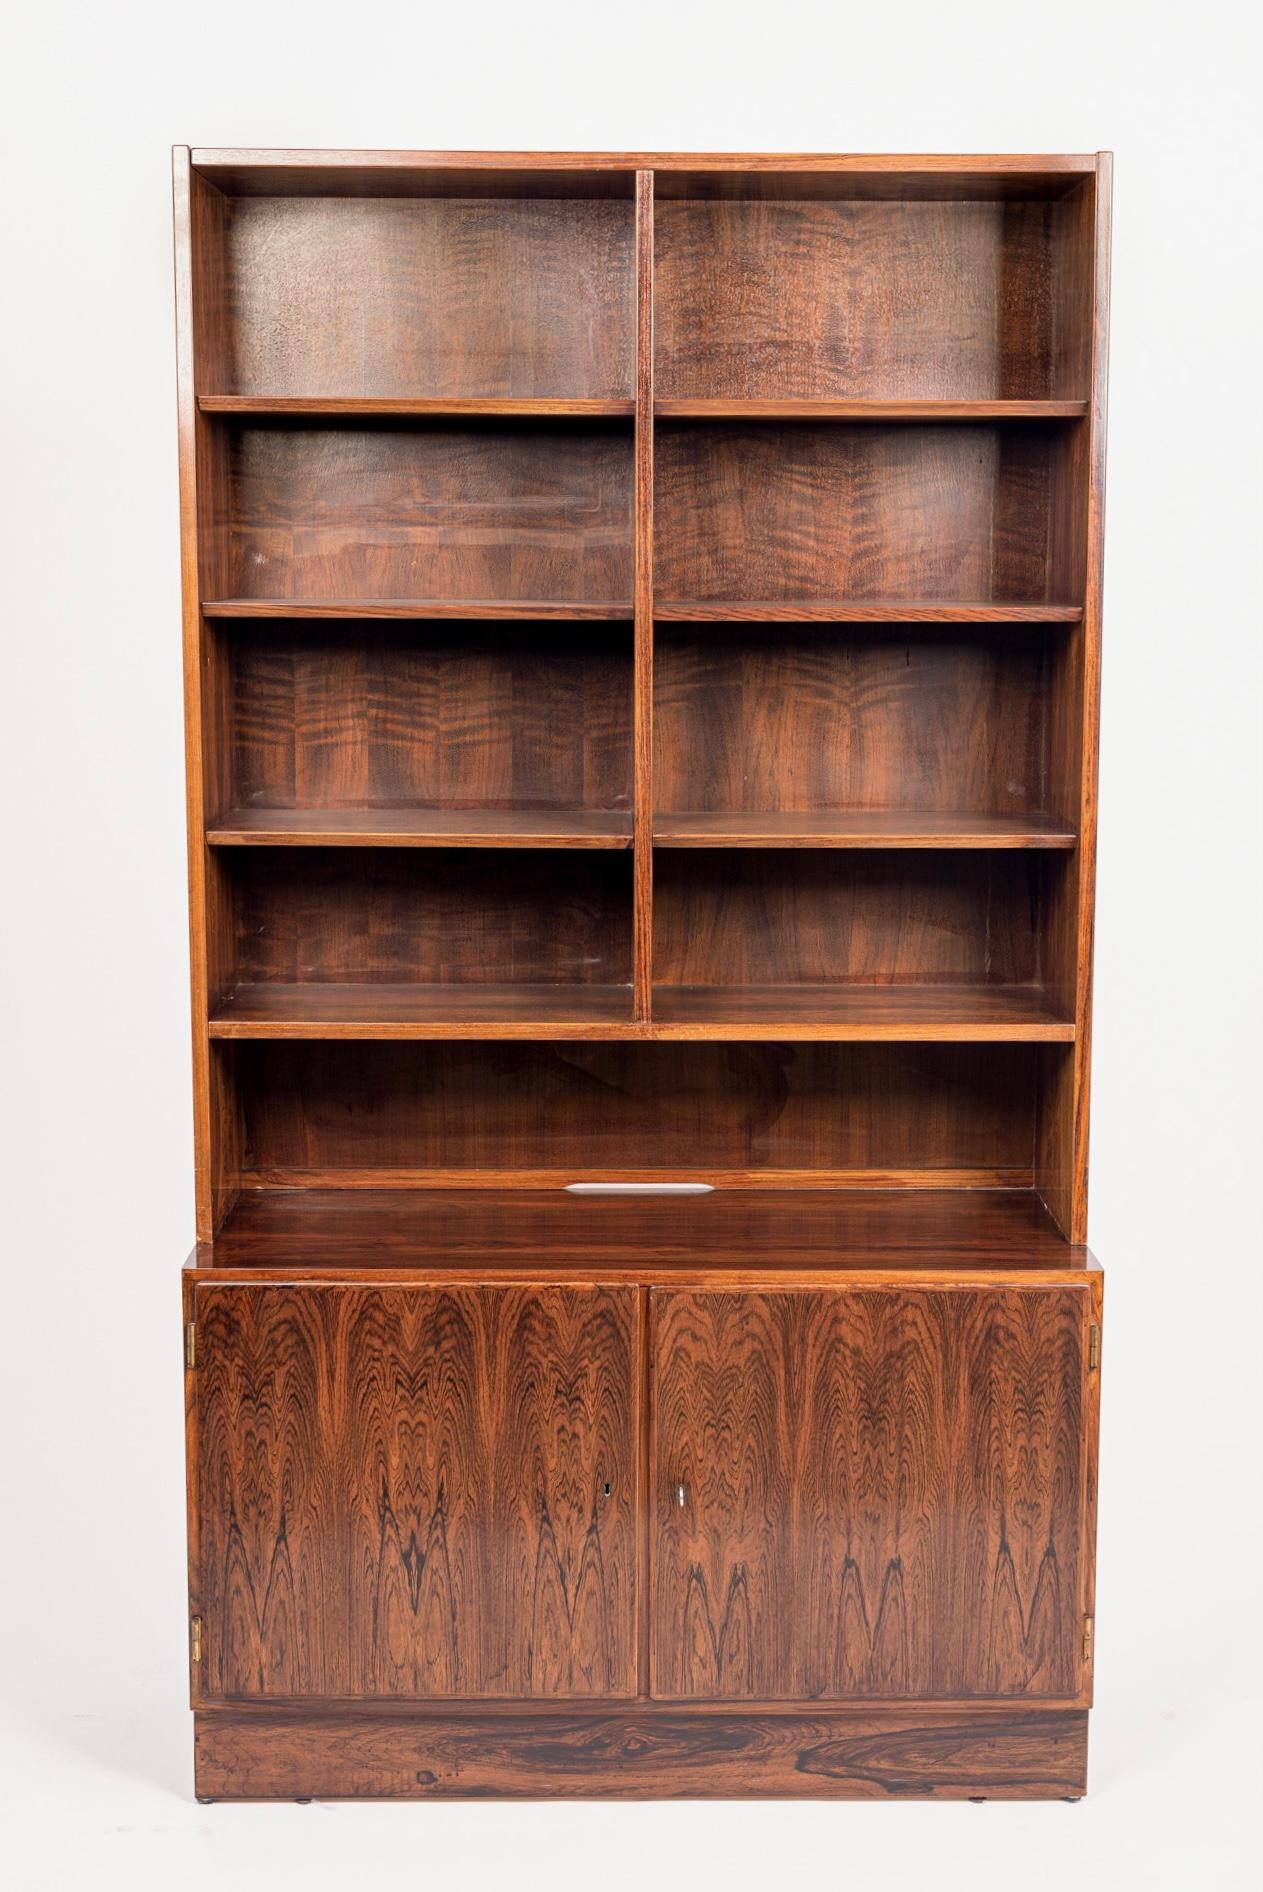 This vintage midcentury Danish modern two-piece rosewood bookcase designed by Carlo Jensen for Hundevad & Co. was made in Denmark circa 1960. The Minimalist Scandinavian Modern design features clean, geometric lines and the cabinet is impeccably